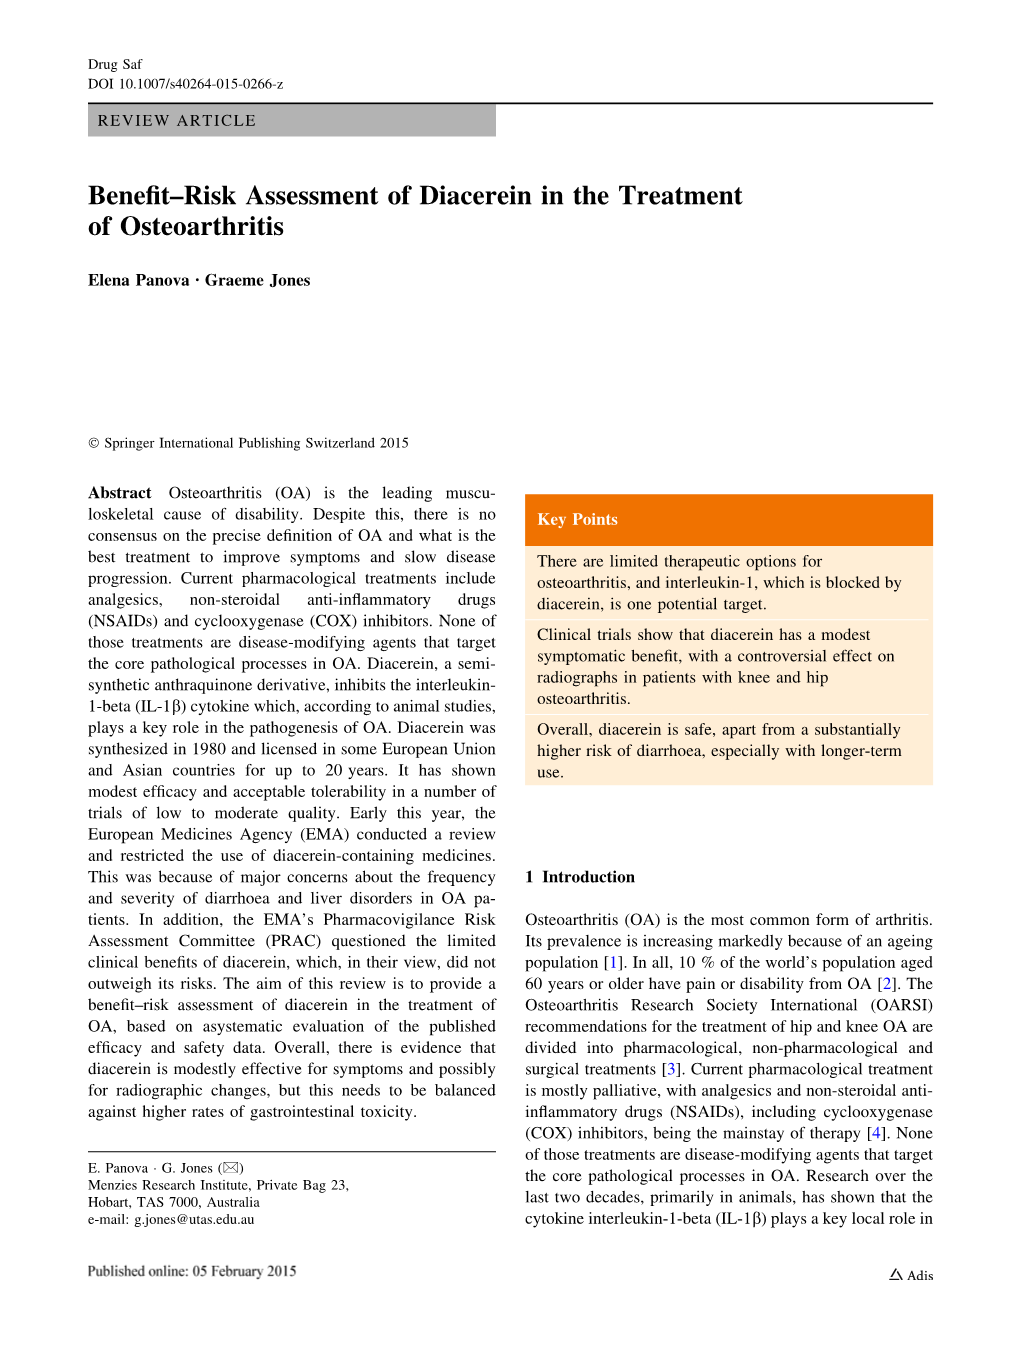 Benefit–Risk Assessment of Diacerein in the Treatment of Osteoarthritis